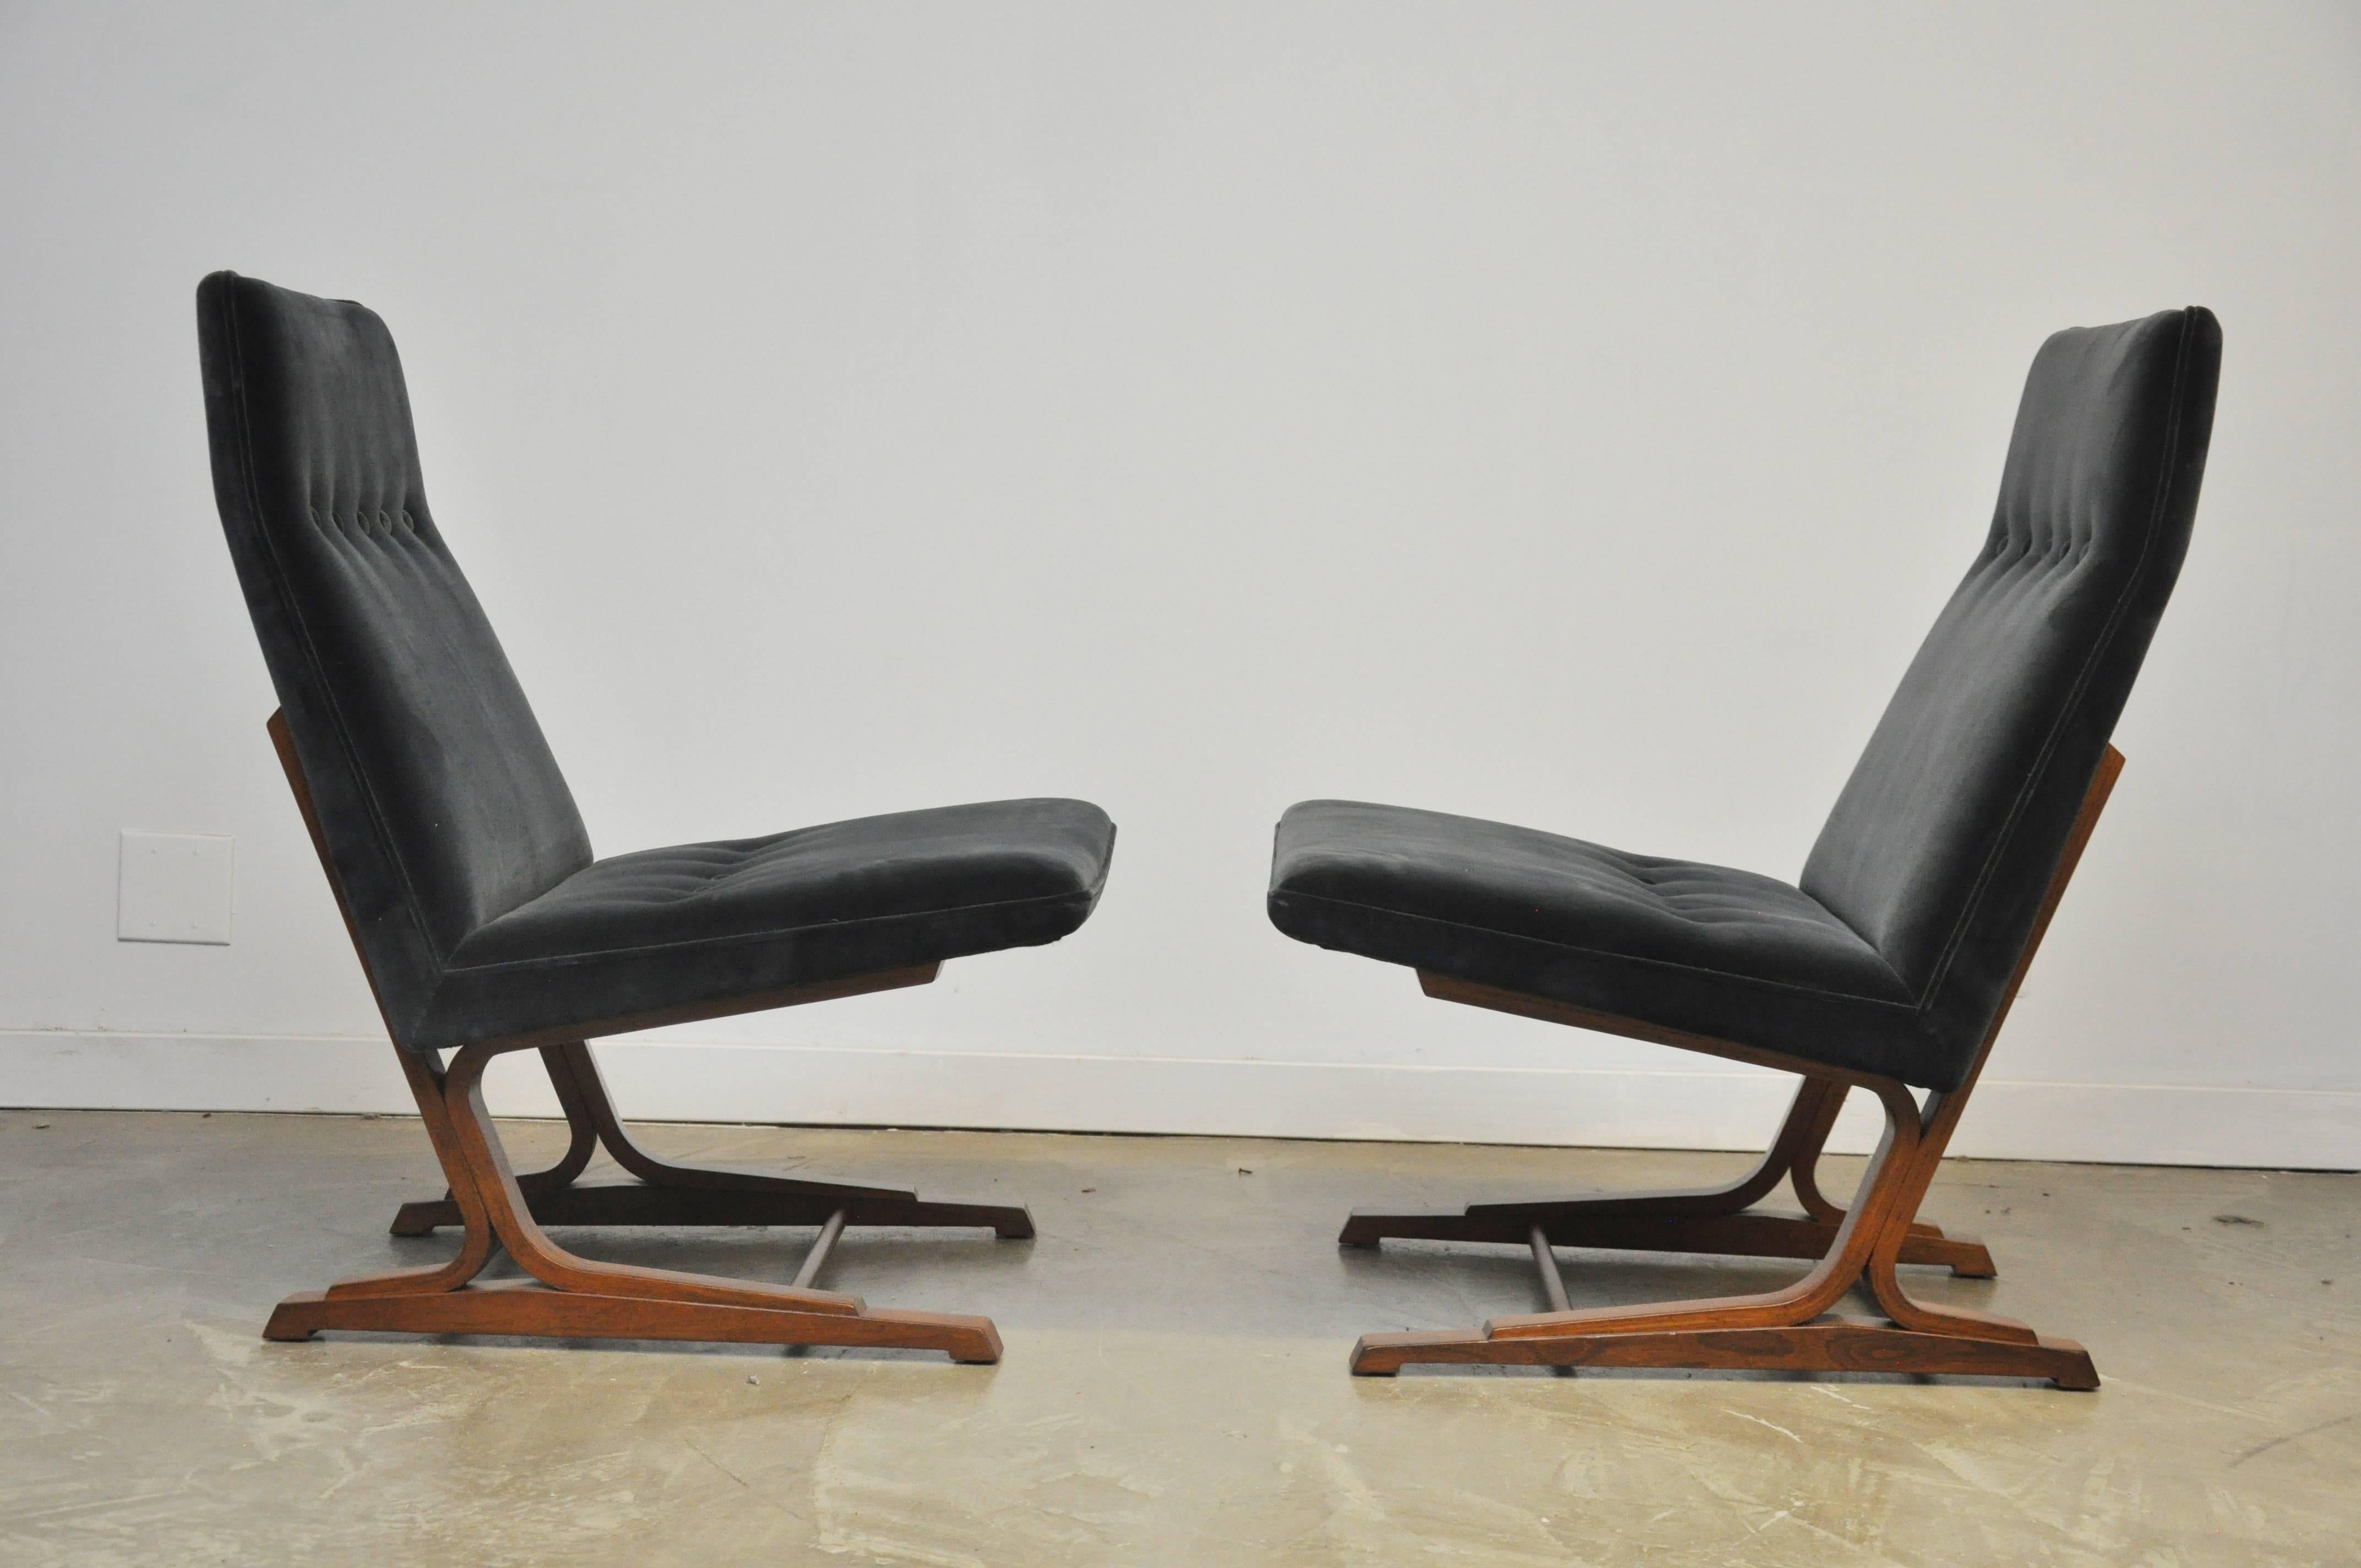 Rare form cantilever frame lounge chairs by Edward Wormley for Dunbar. Model 480, circa 1960. Fully restored, refinished, and reupholstered in velvet.

Price is per chair.